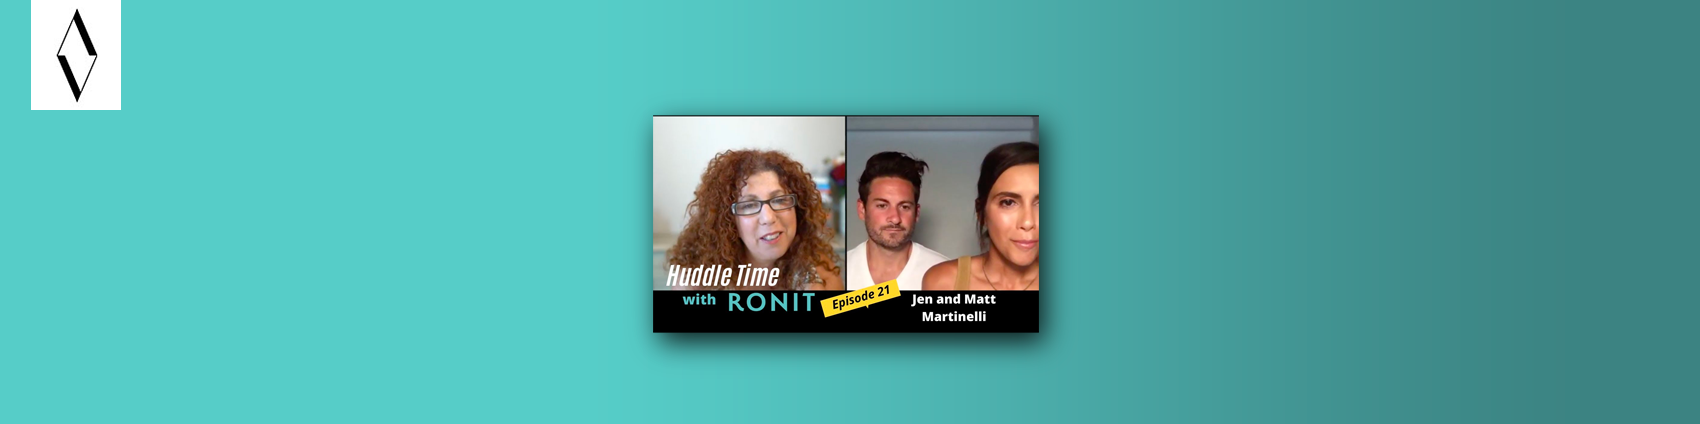 All About salon recruitment on Huddle Time with Ronit + Canvas ME